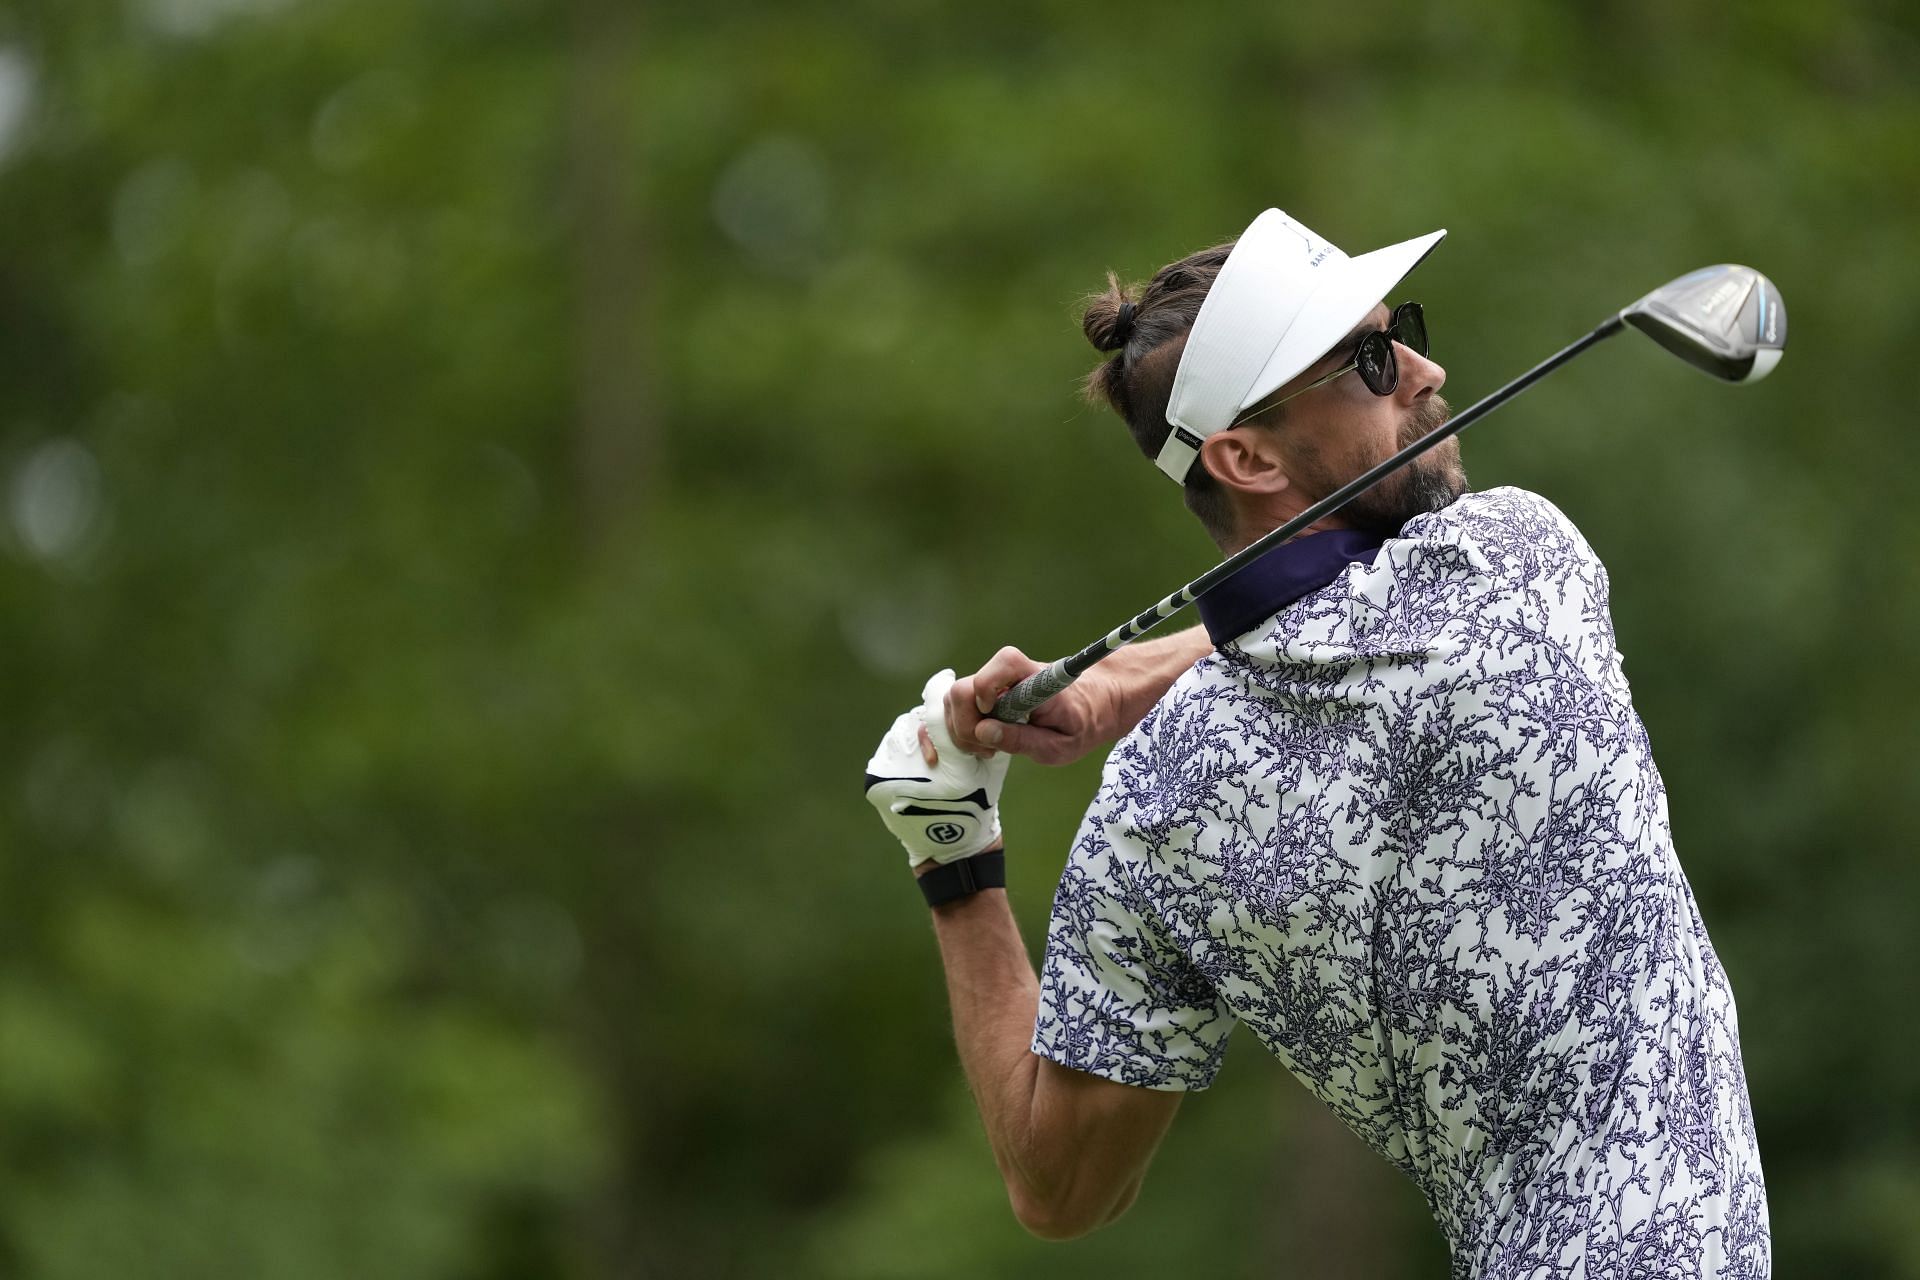 Former Olympic Swimmer Michael Phelps of the United States plays his tee shot during the Celebrity Foursome in the second round of the American Family Insurance Championship